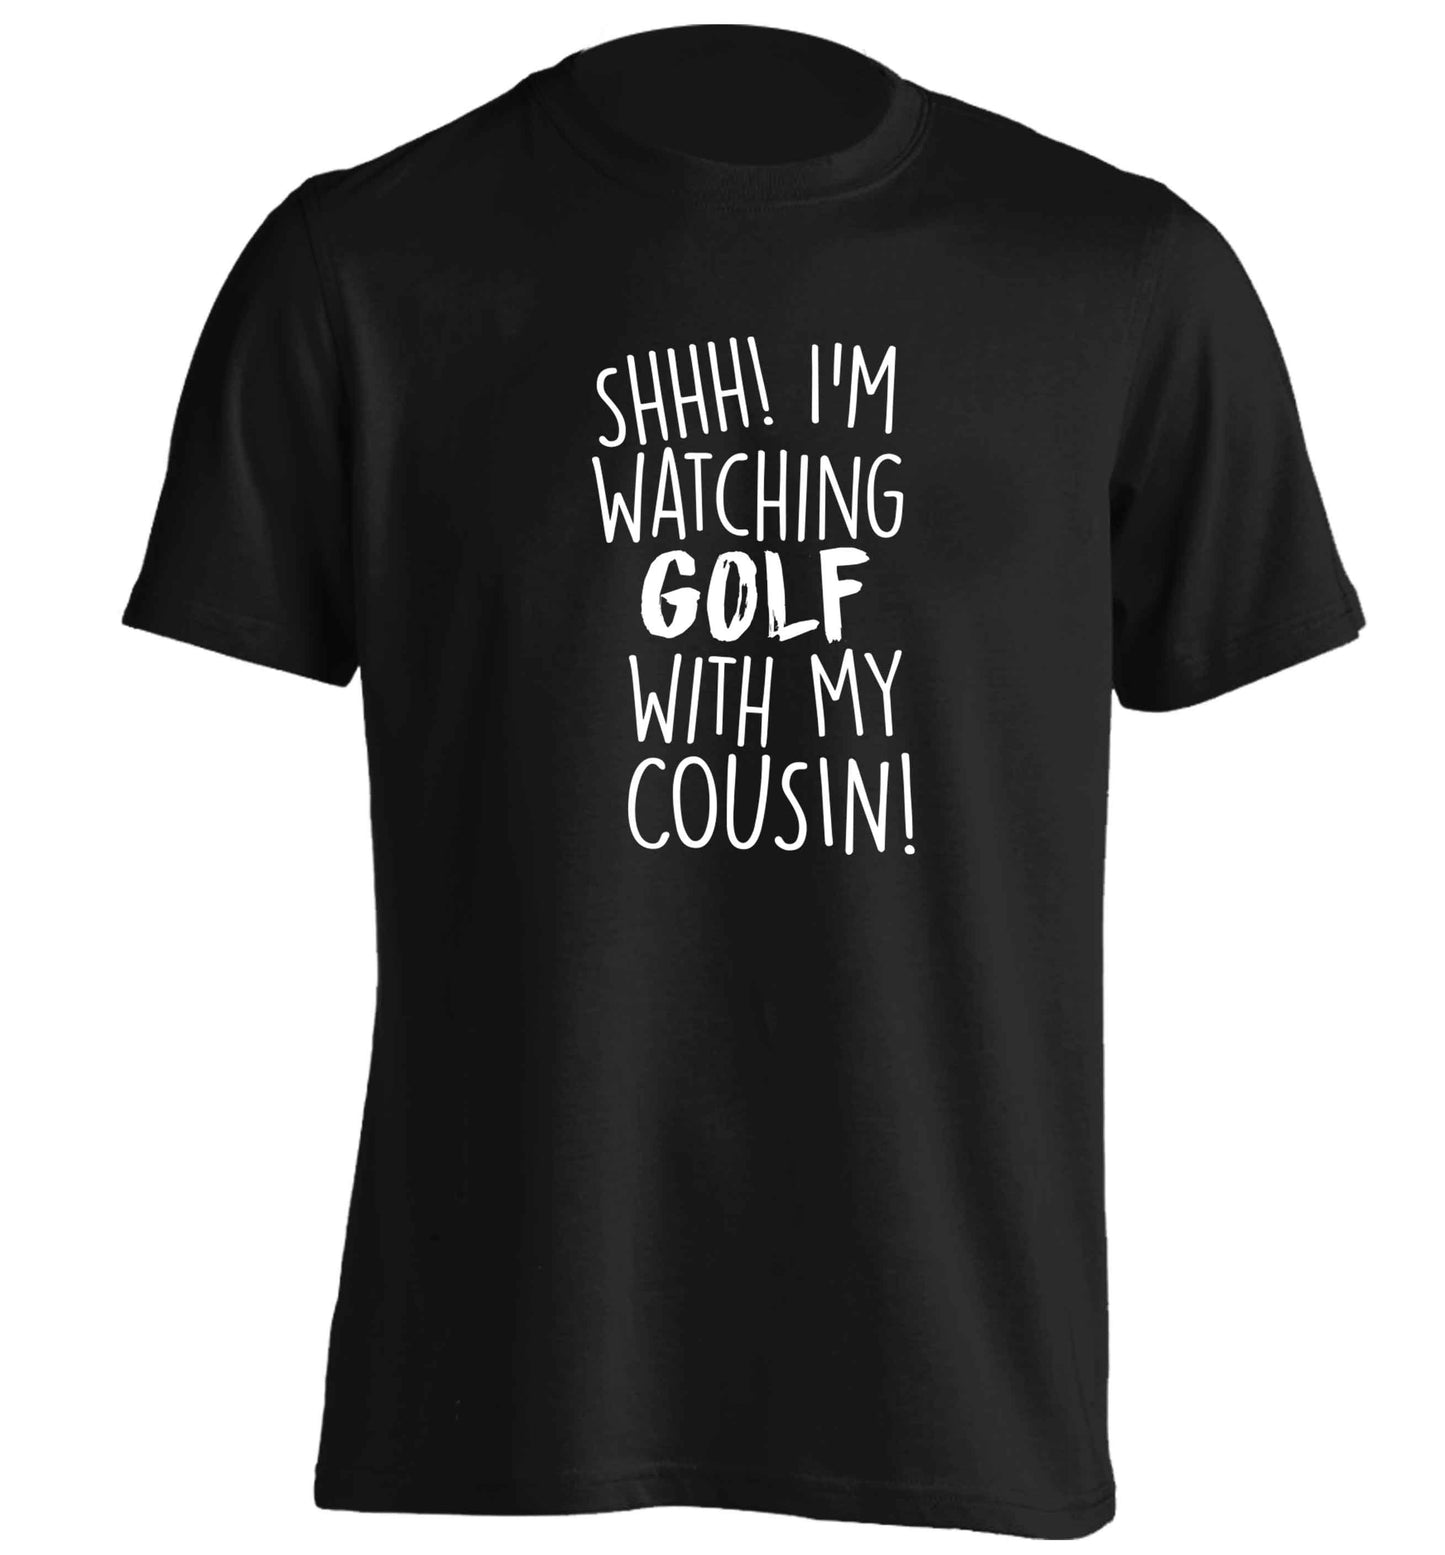 Shh I'm watching golf with my cousin adults unisex black Tshirt 2XL